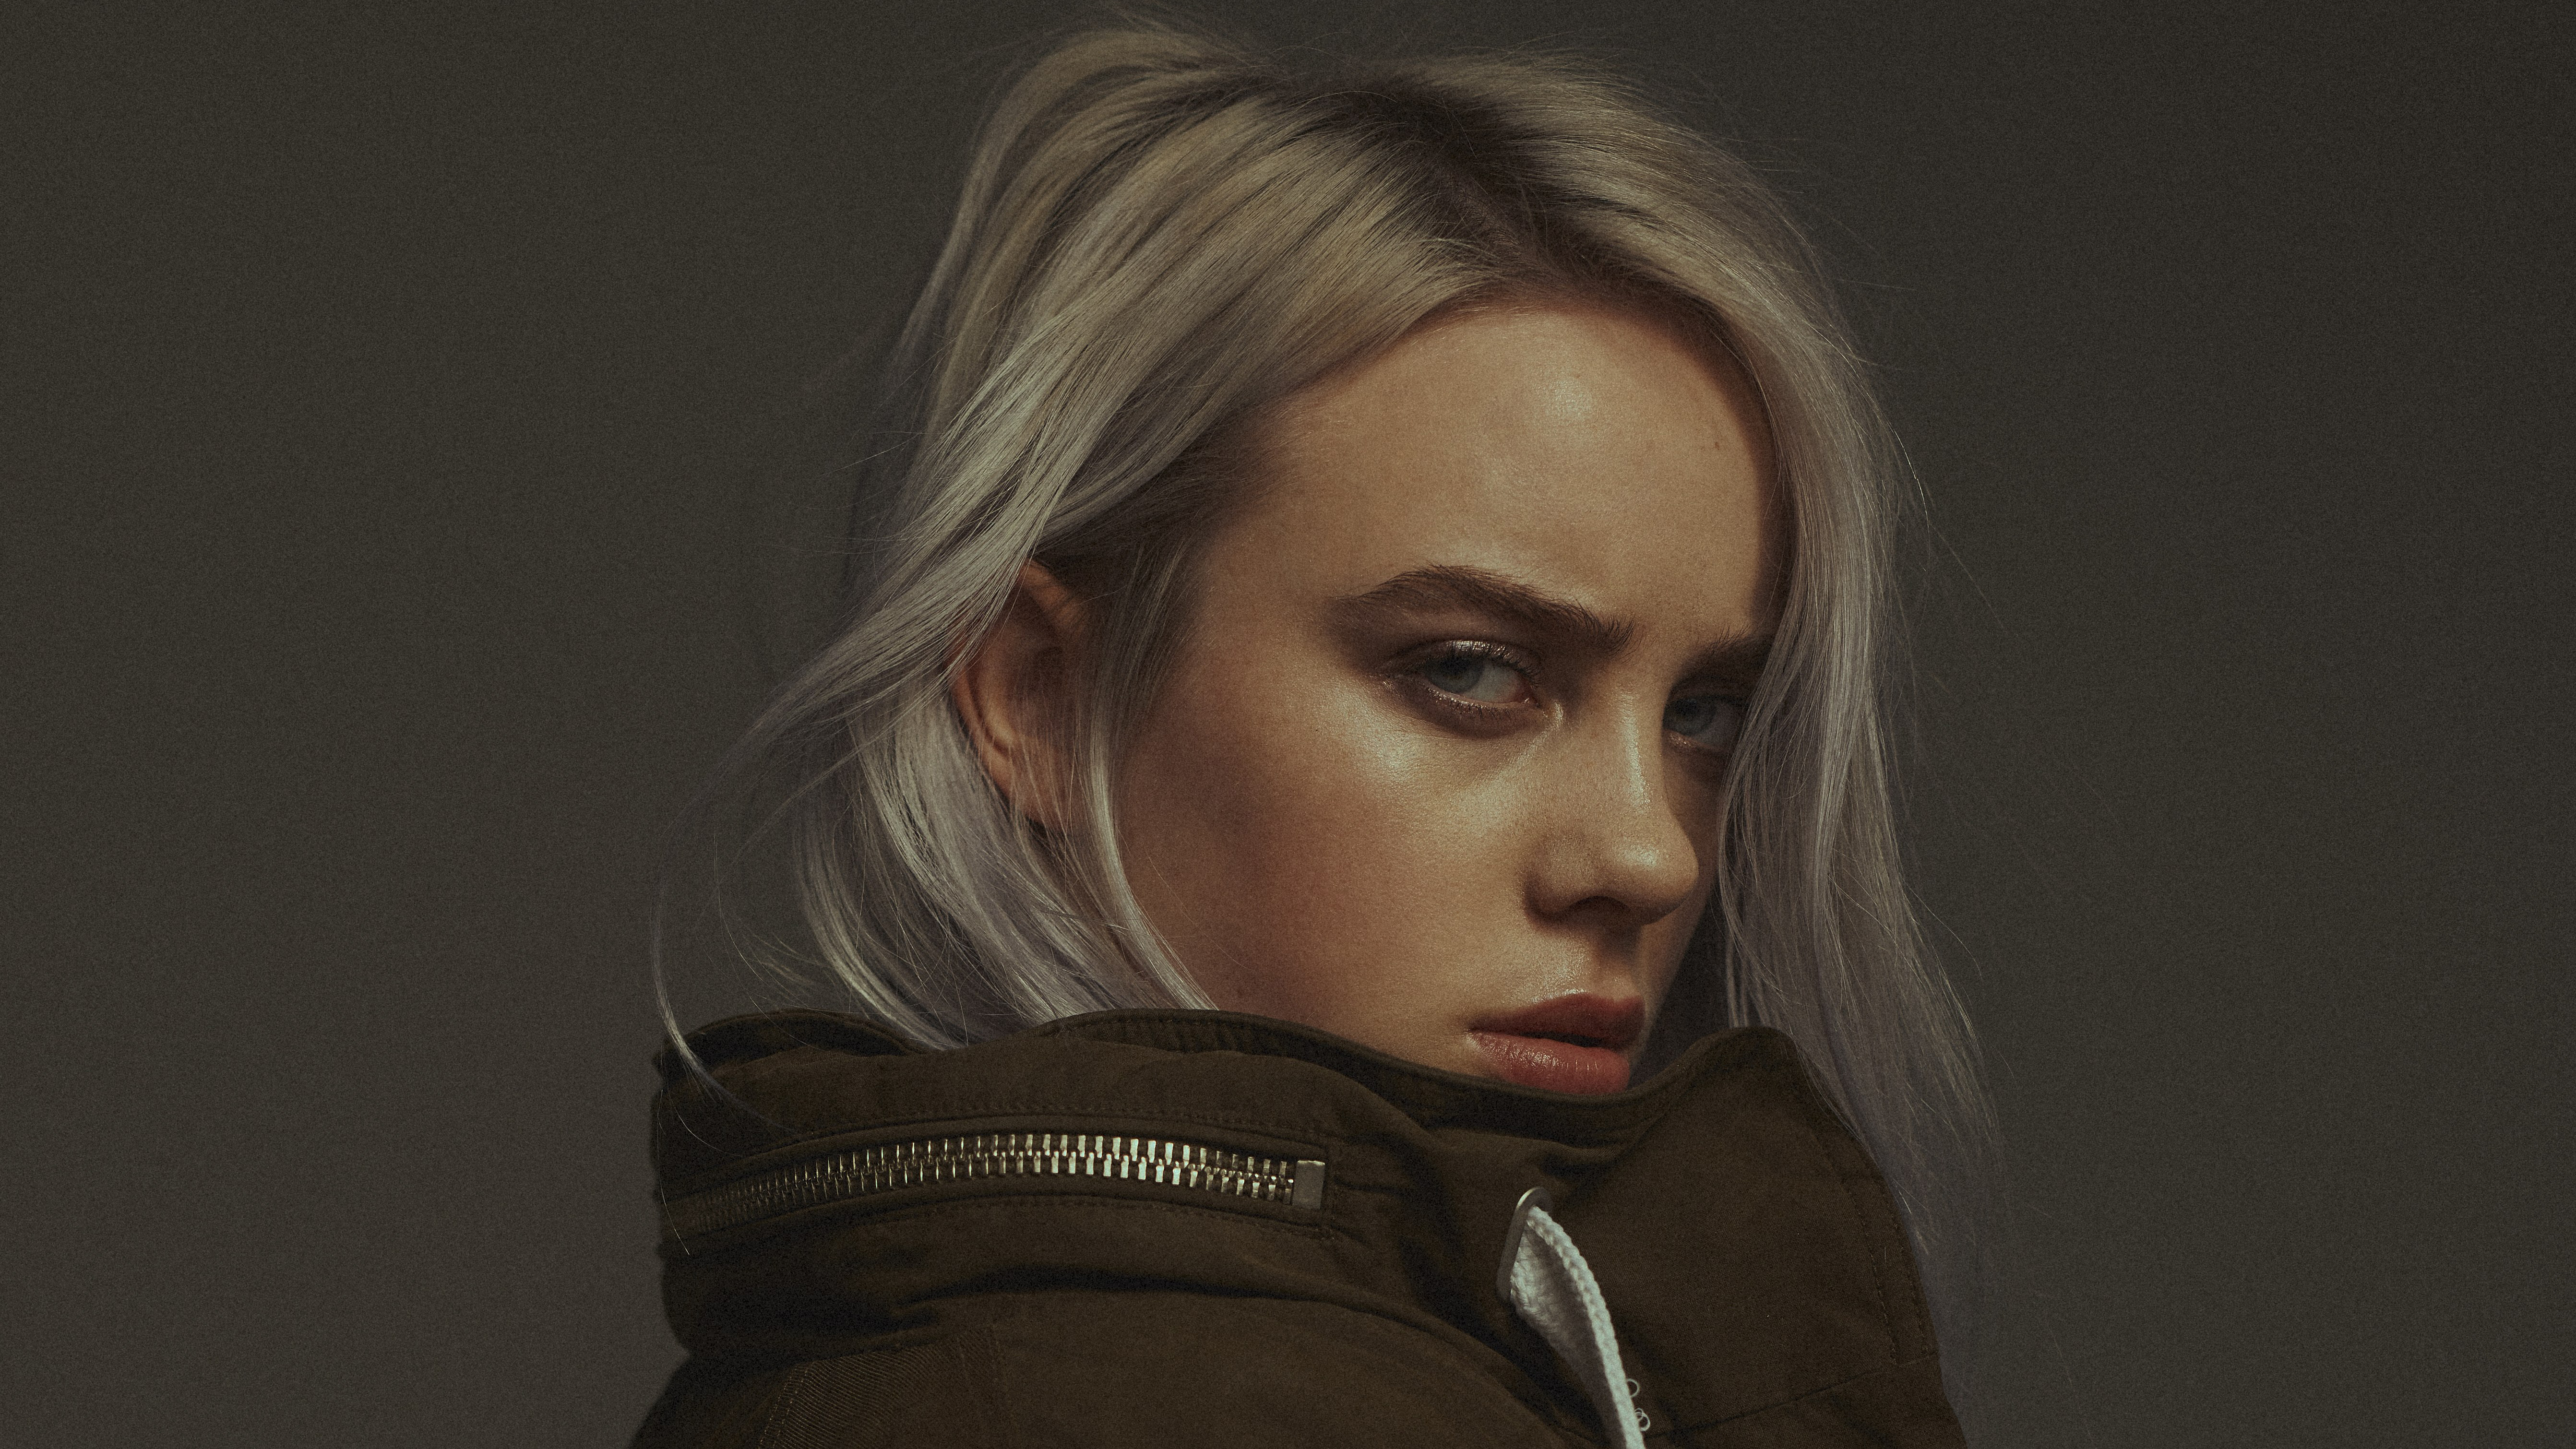 Download Billie Eilish wallpapers for mobile phone free Billie Eilish  HD pictures